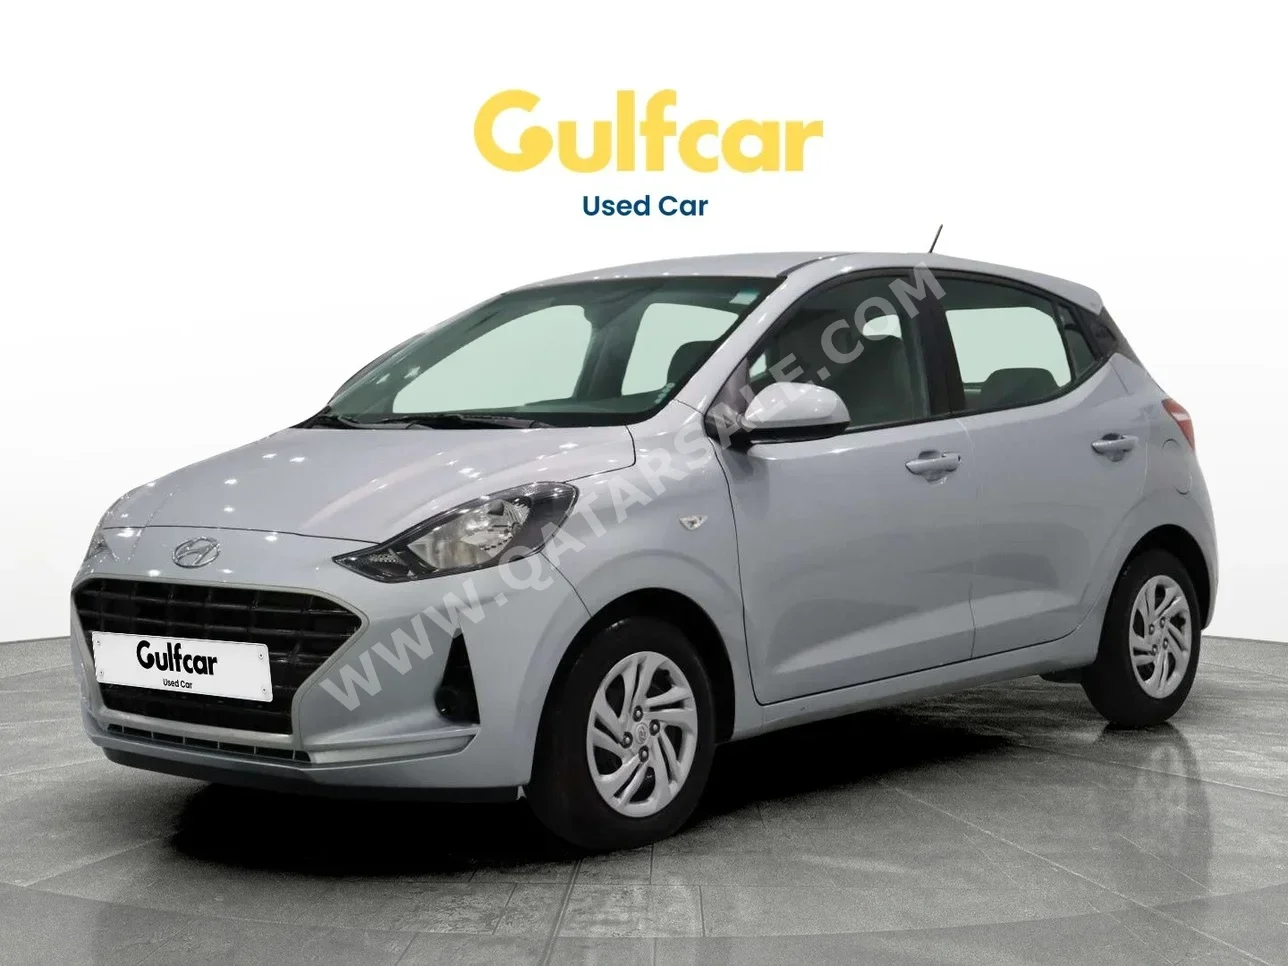 Hyundai  I  10  2023  Automatic  39,323 Km  3 Cylinder  Front Wheel Drive (FWD)  Hatchback  Silver  With Warranty